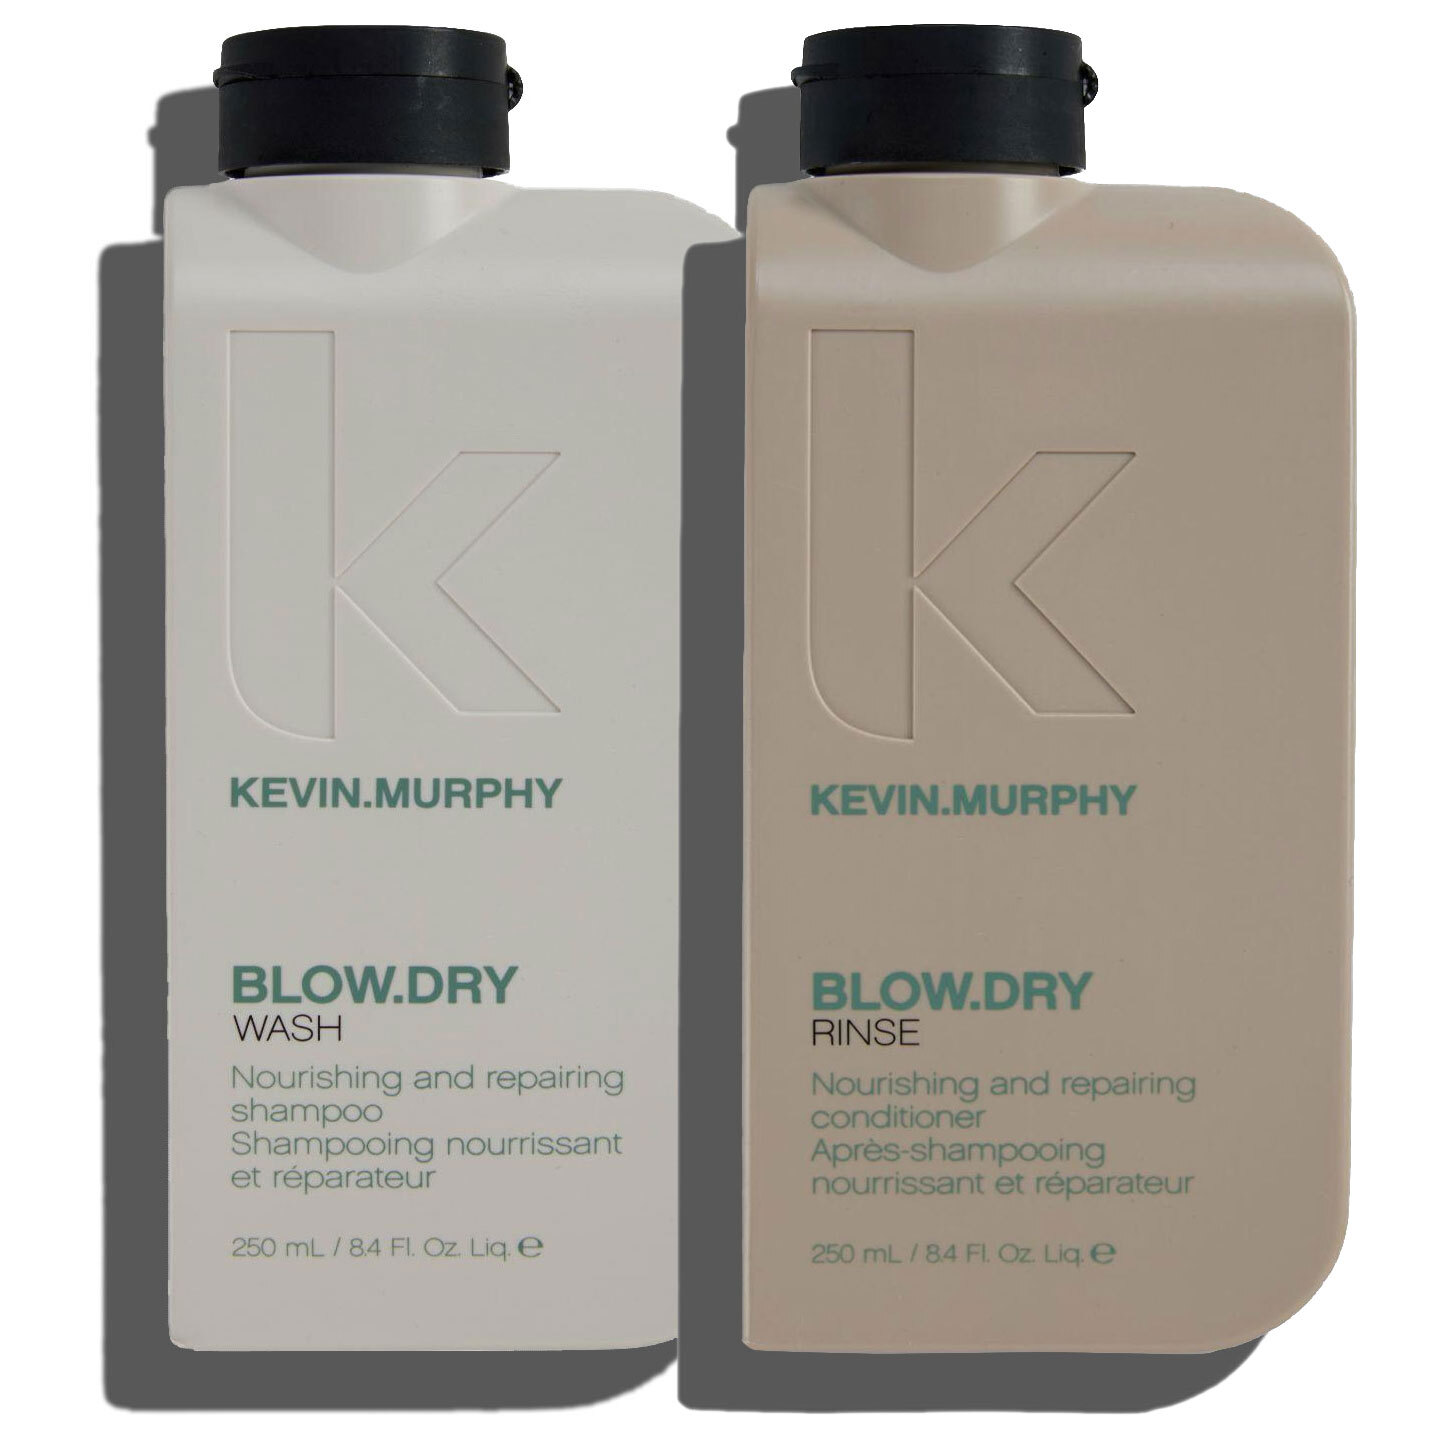 KEVIN.MURPHY BLOW.DRY WASH & RINSE SALON INTRO